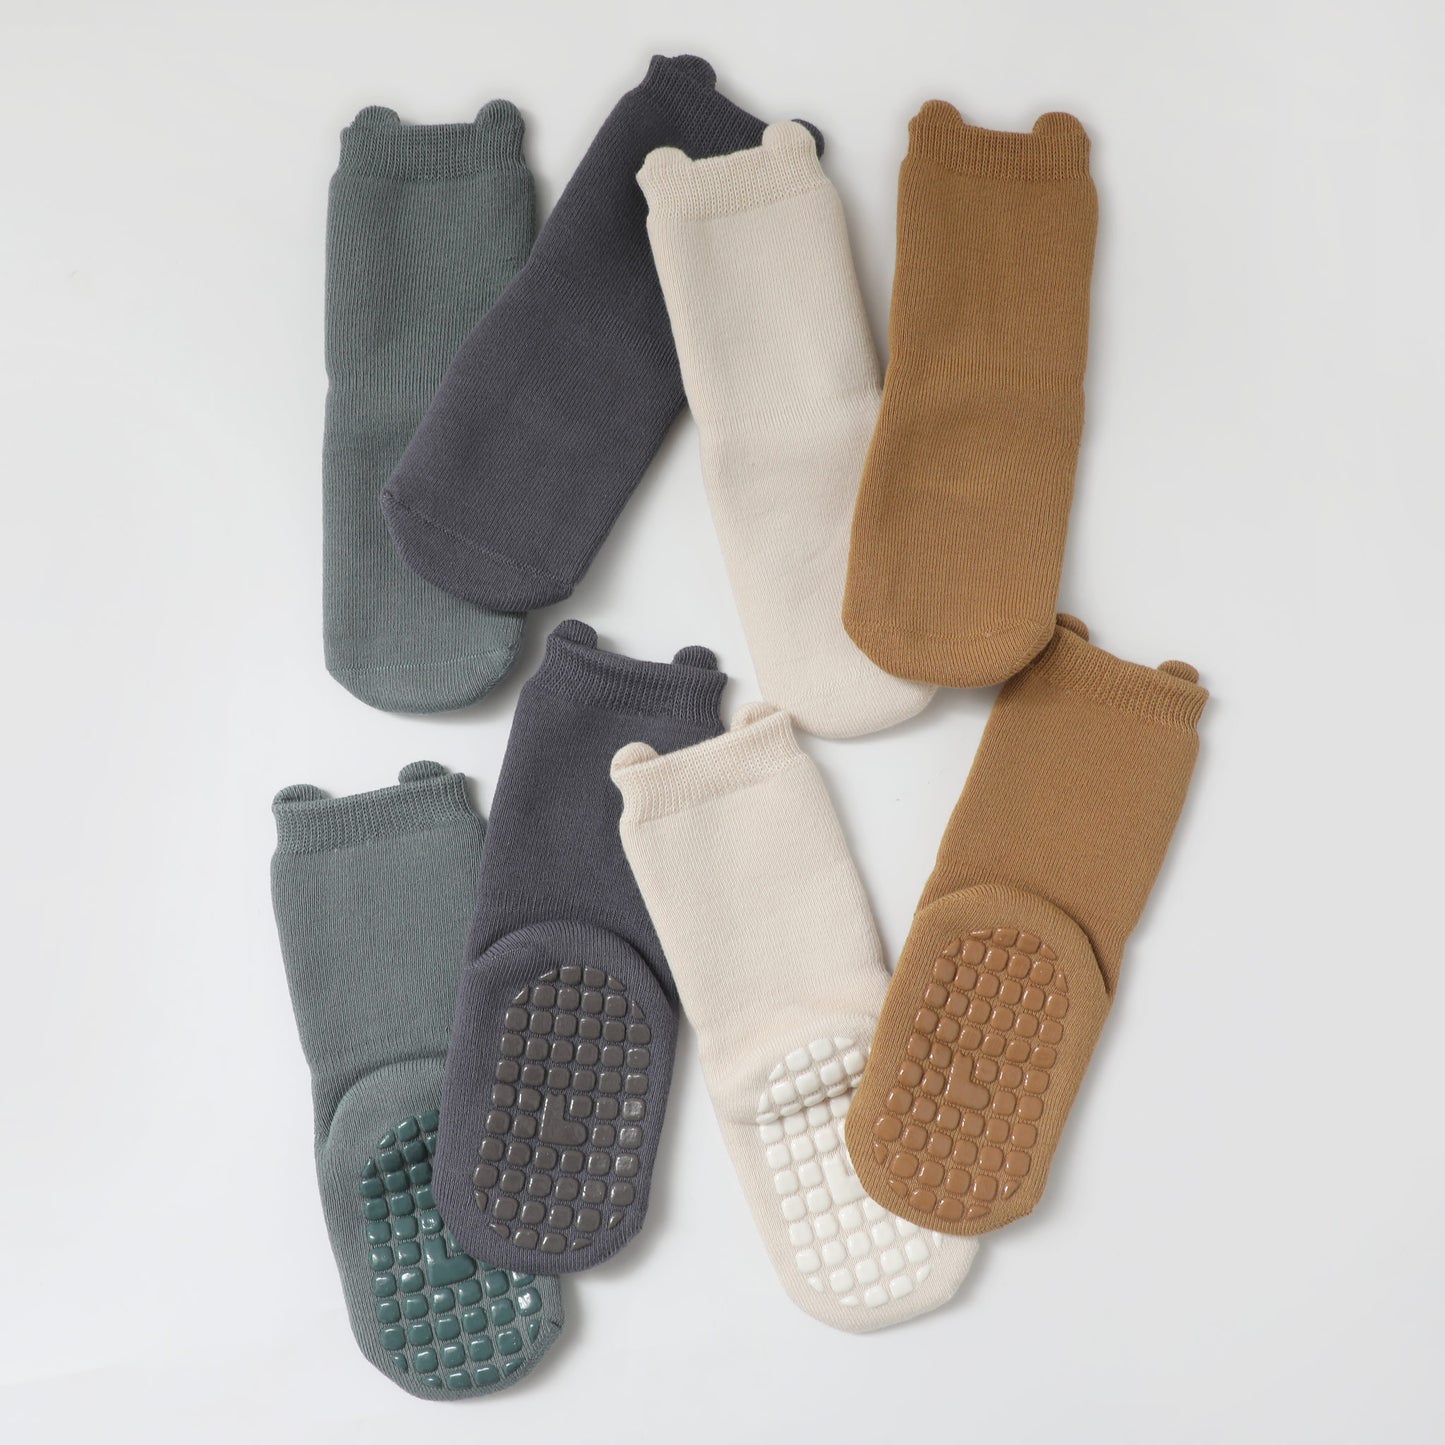 New- Candy Mountain - Extra Warm & Soft- 4 Pairs of Stay-On Baby & Toddler Non-Slip Socks